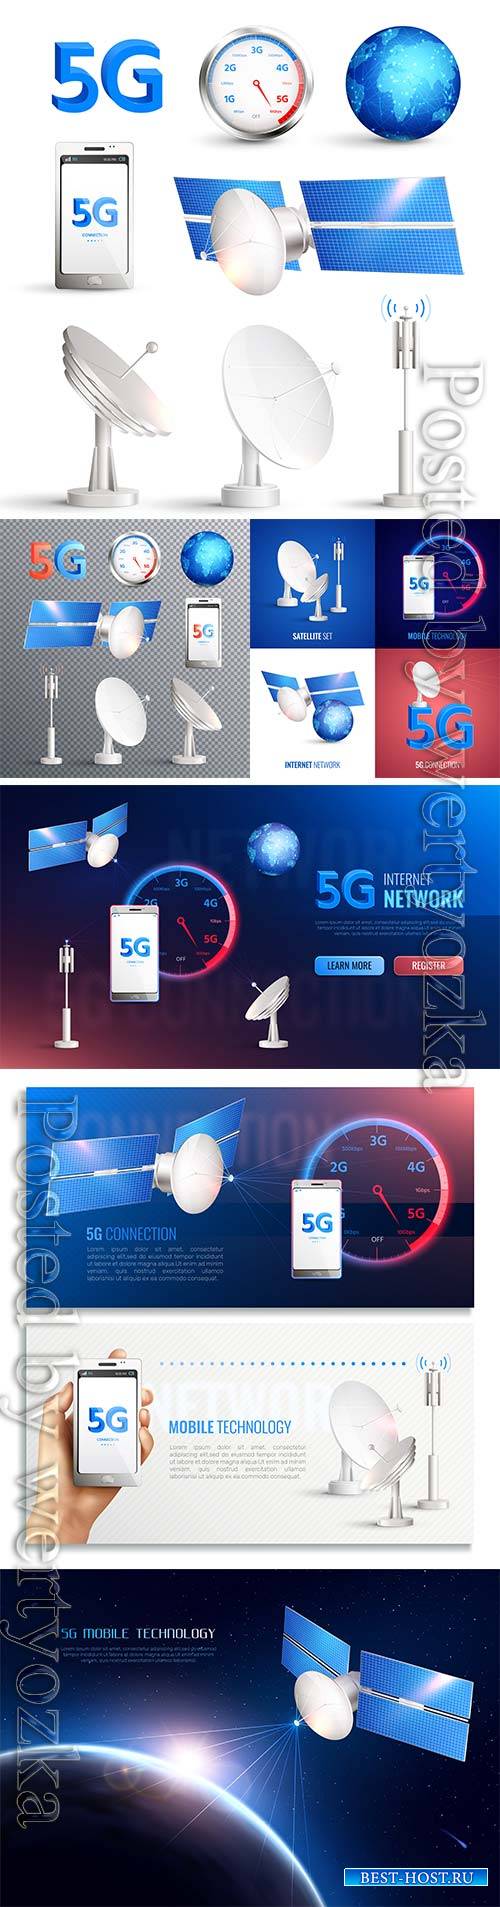 Mobile technology vector icons, broadband internet connection of 5g standar ...